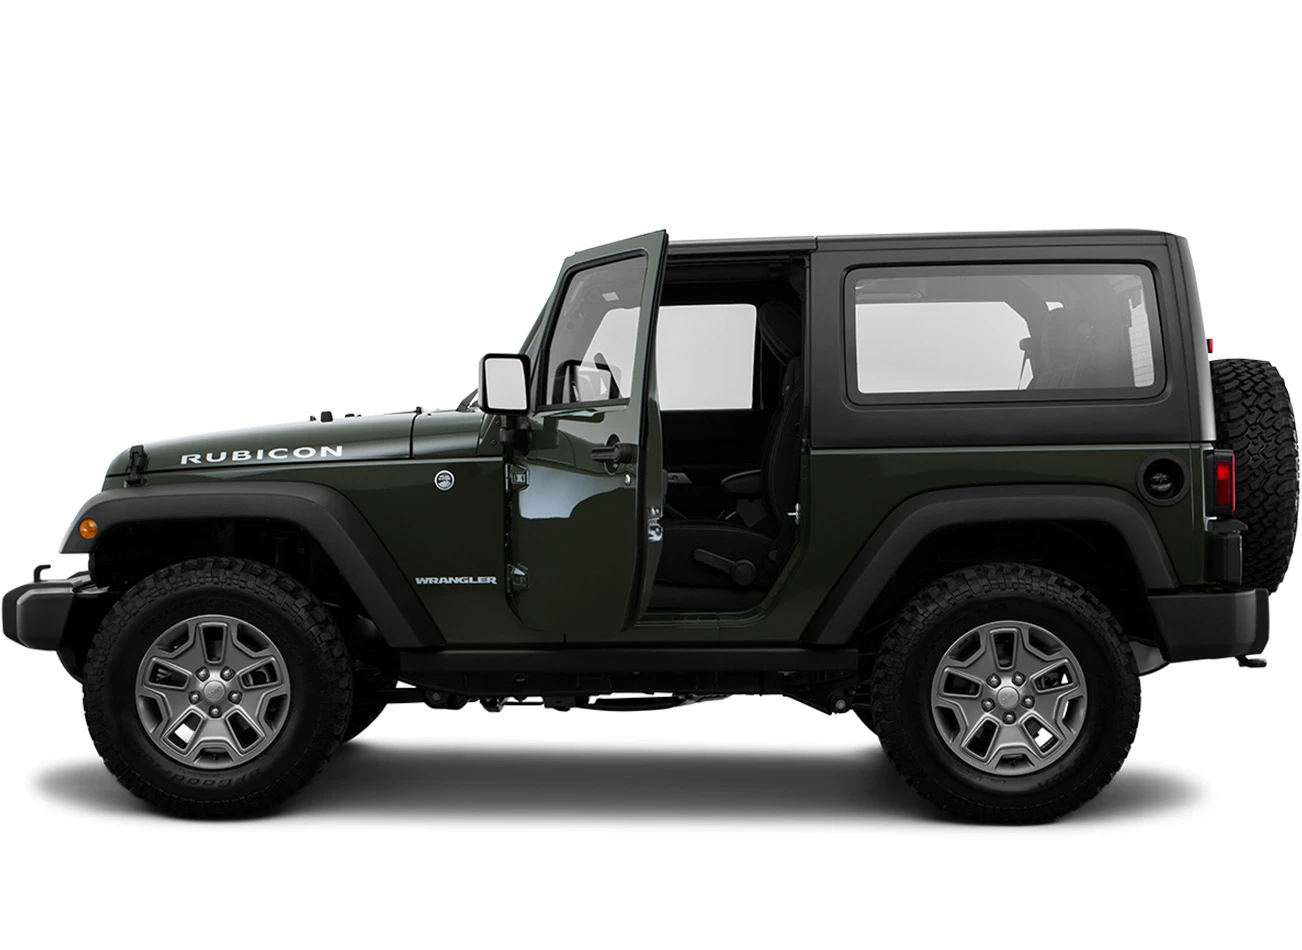 2016 Jeep Wrangler: Side exterior view of vehicle | CarMax